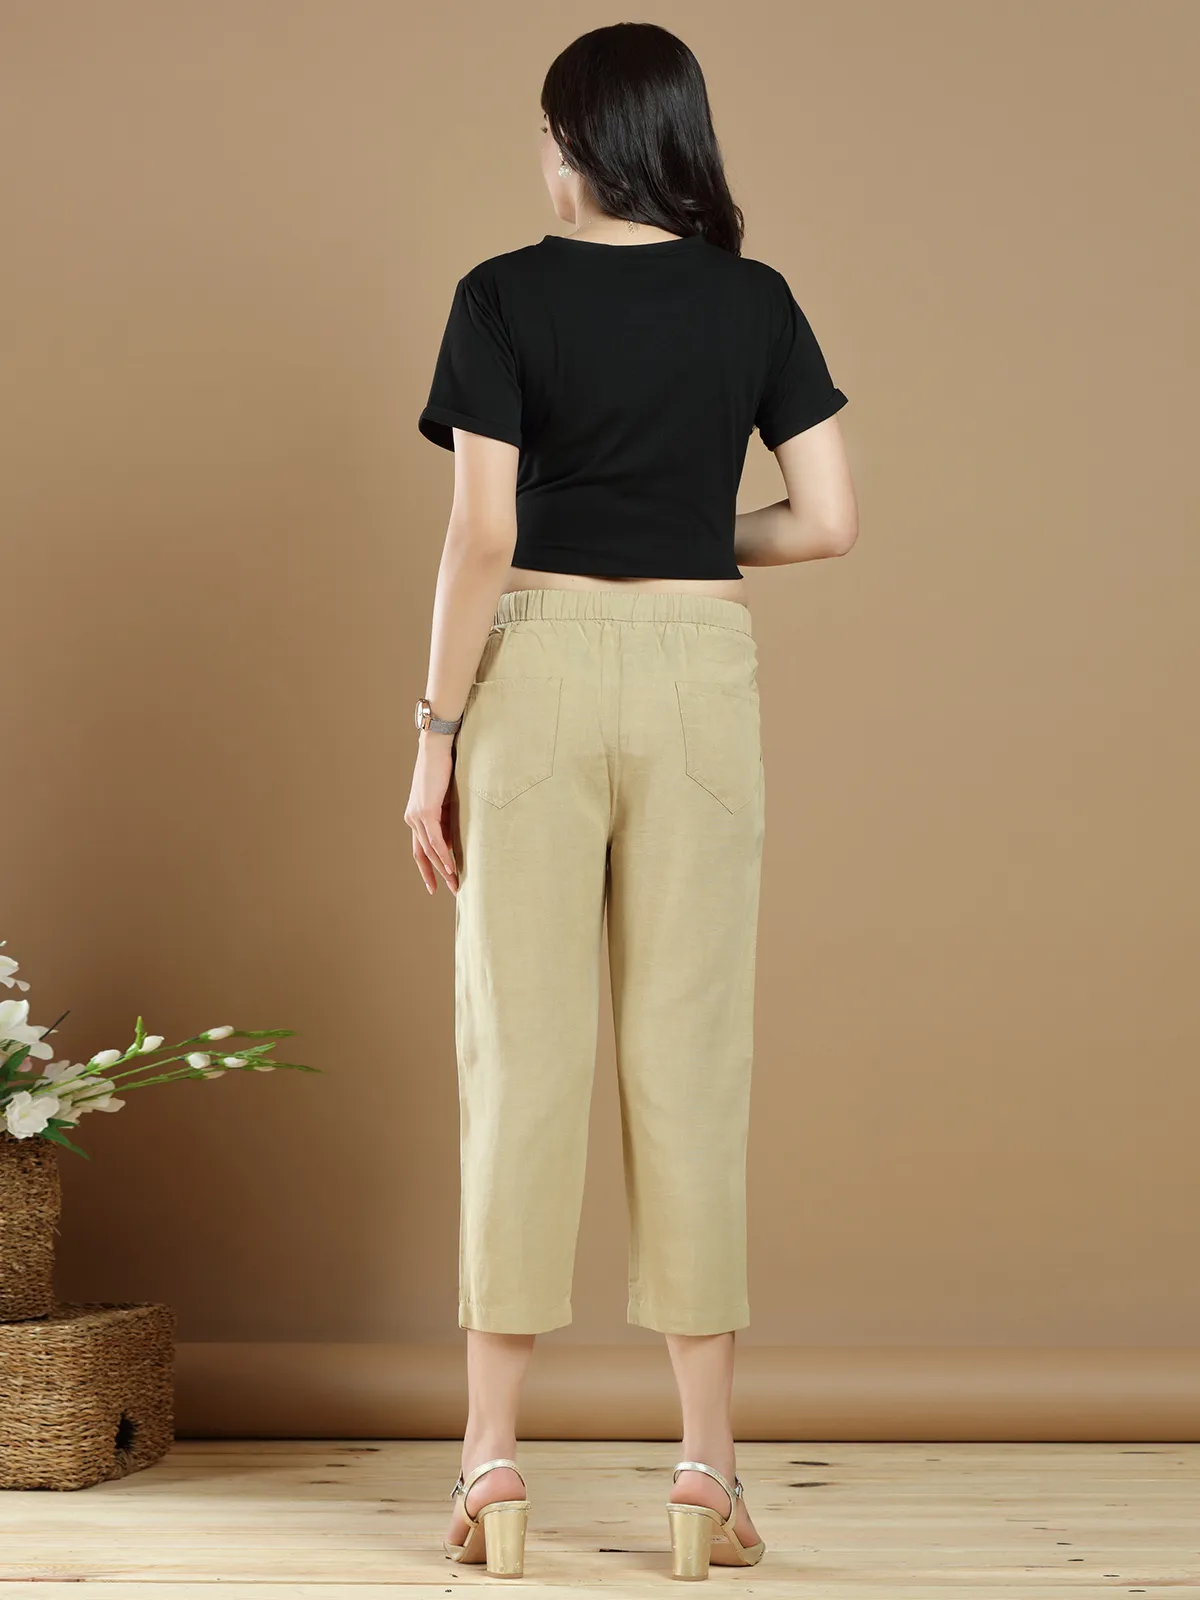 Hazel yellow plain pant for casual wear in cotton